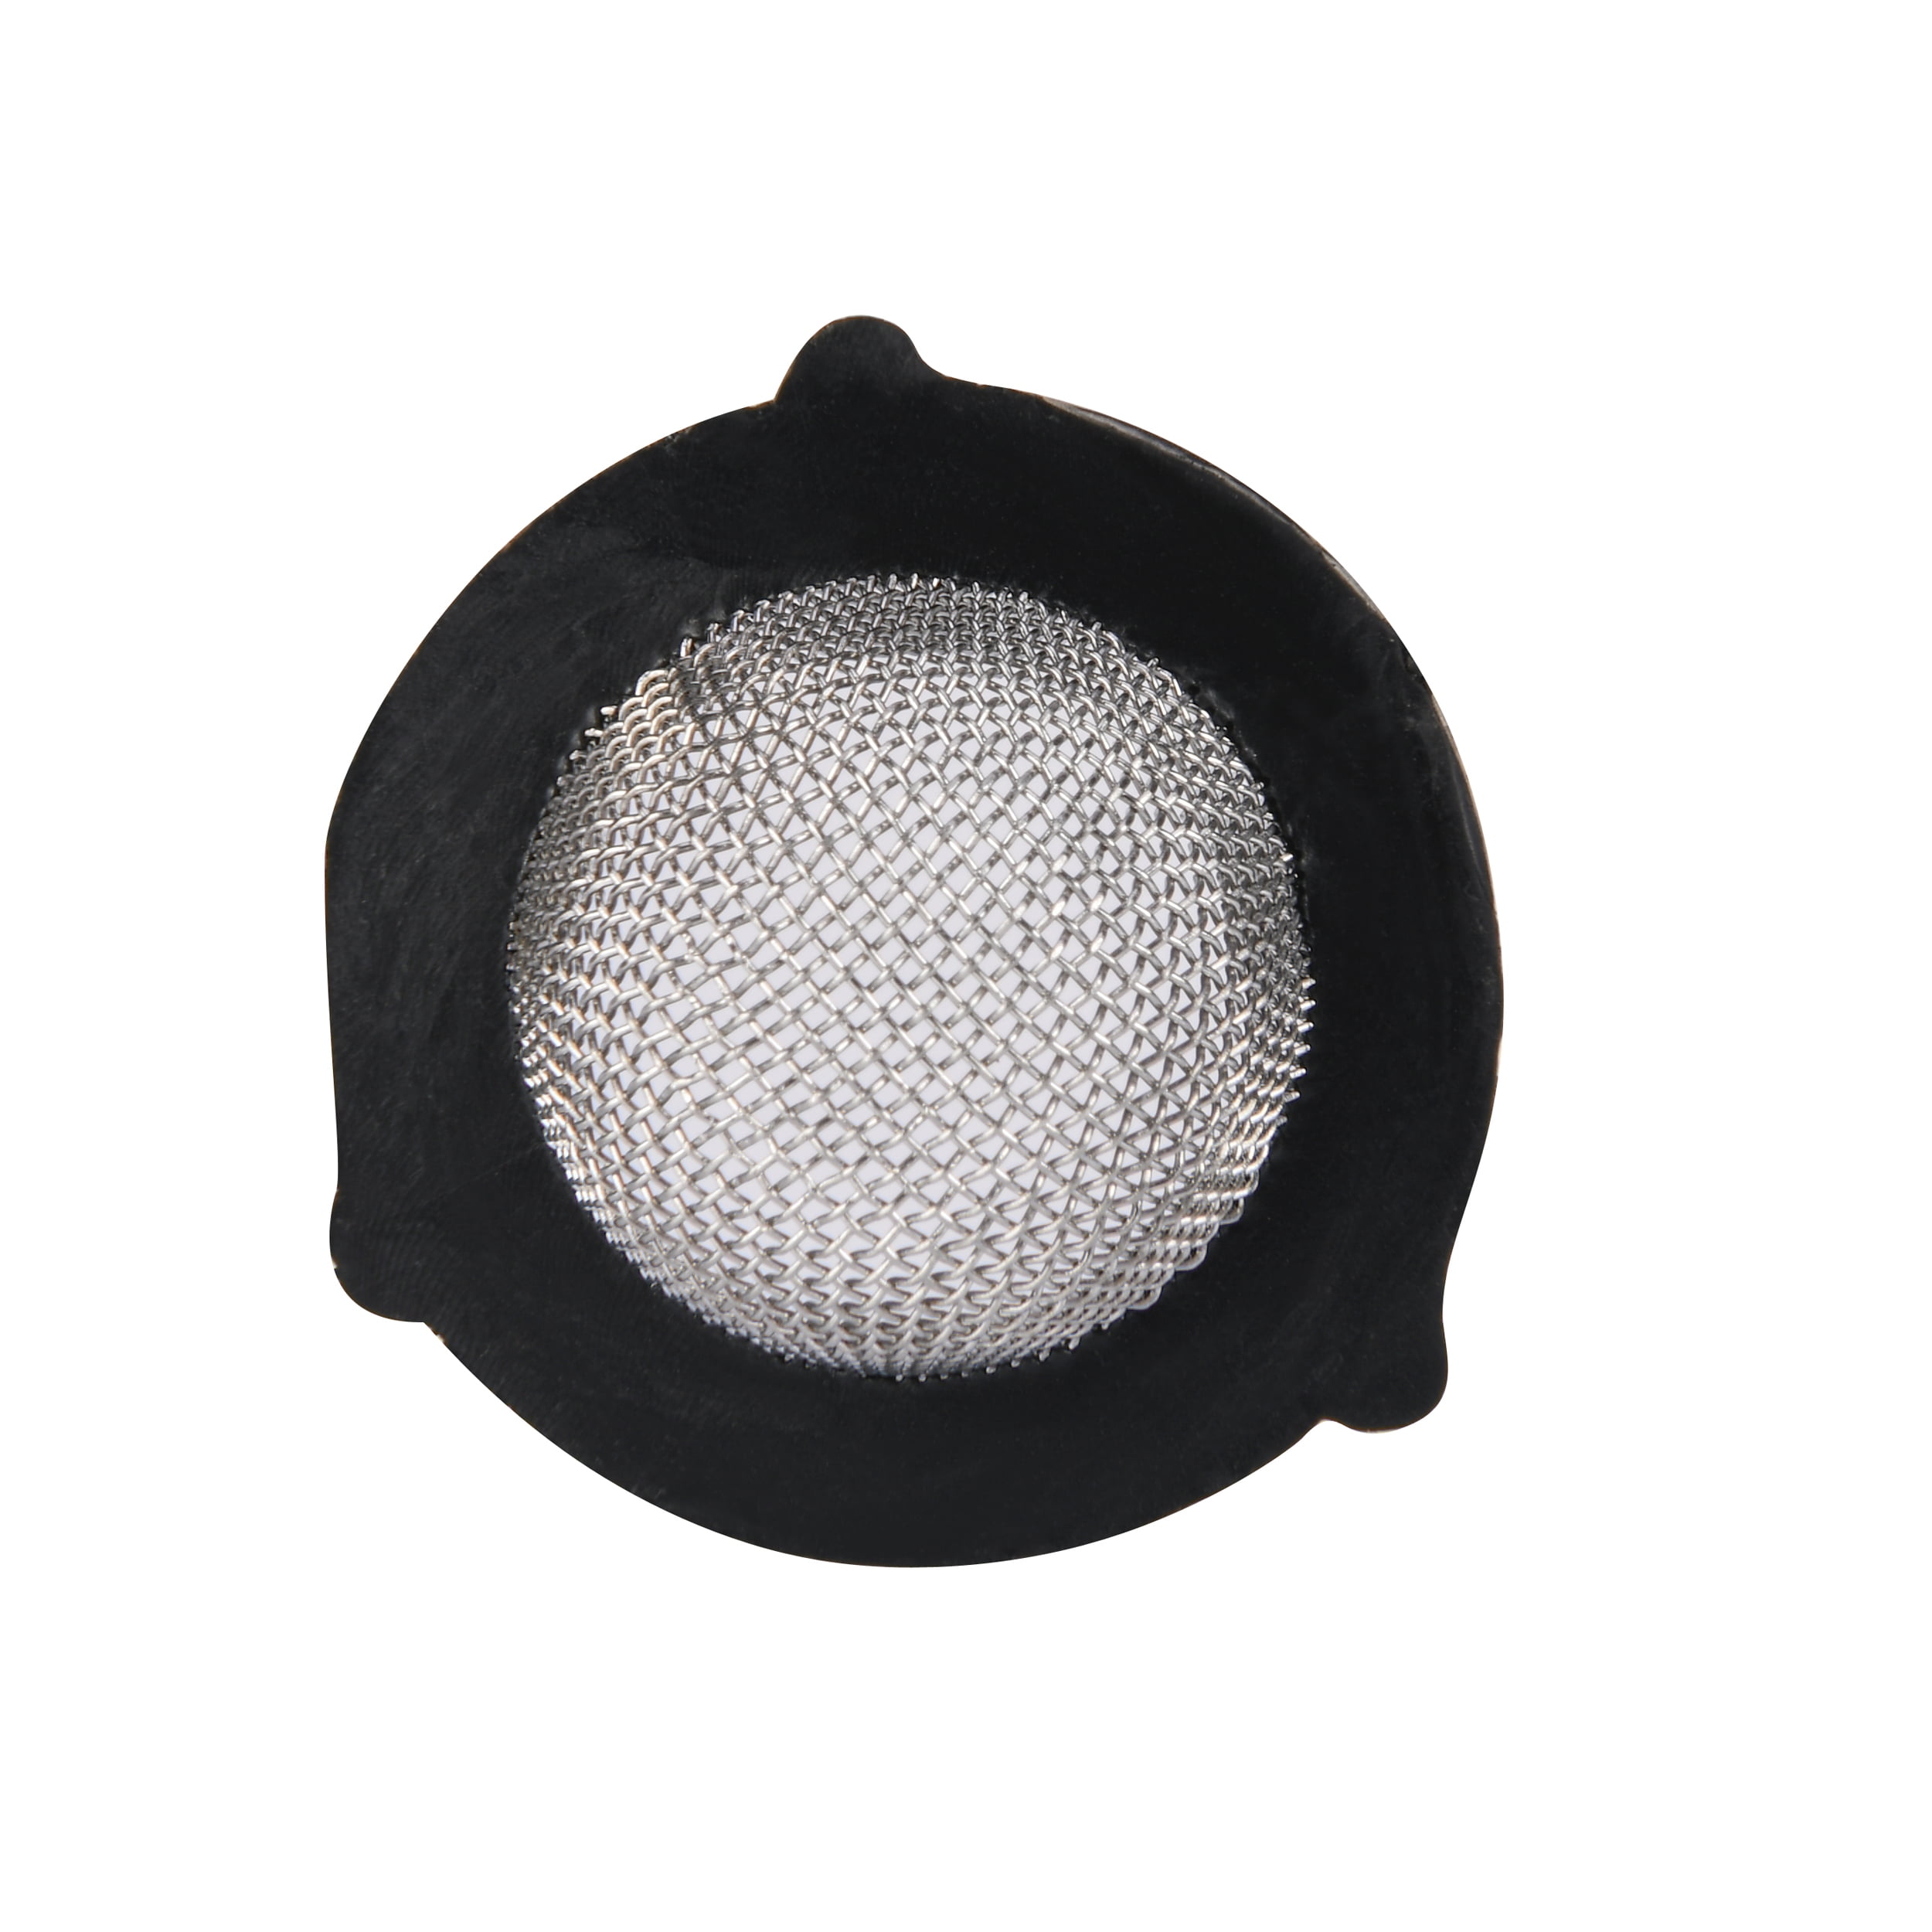 M MINGLE Garden Hose Filter for Pressure Washer Inlet Water, Inline Filter  for Sediment, 40 Mesh Screen, Extra 100 Mesh